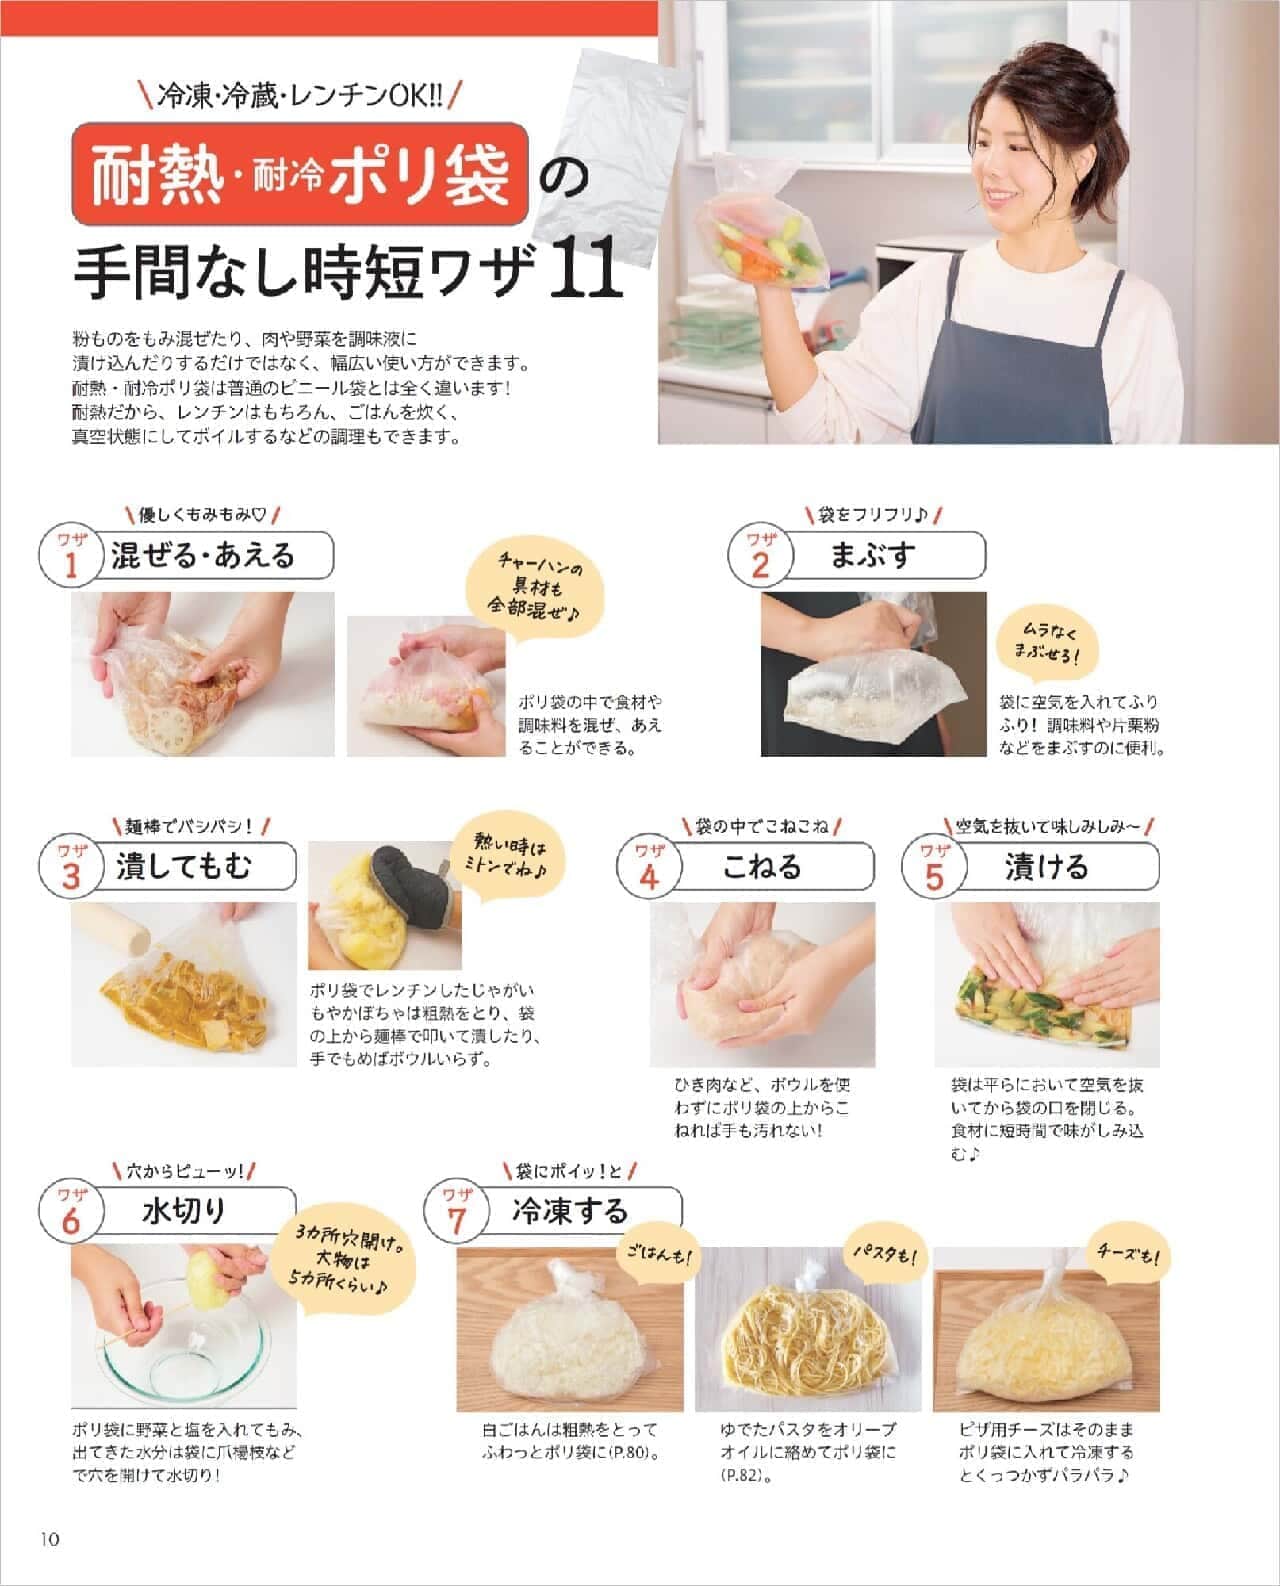 Akka's 308 shortcut side dishes that make full use of heat-resistant containers and plastic bags" (Takarajimasya)